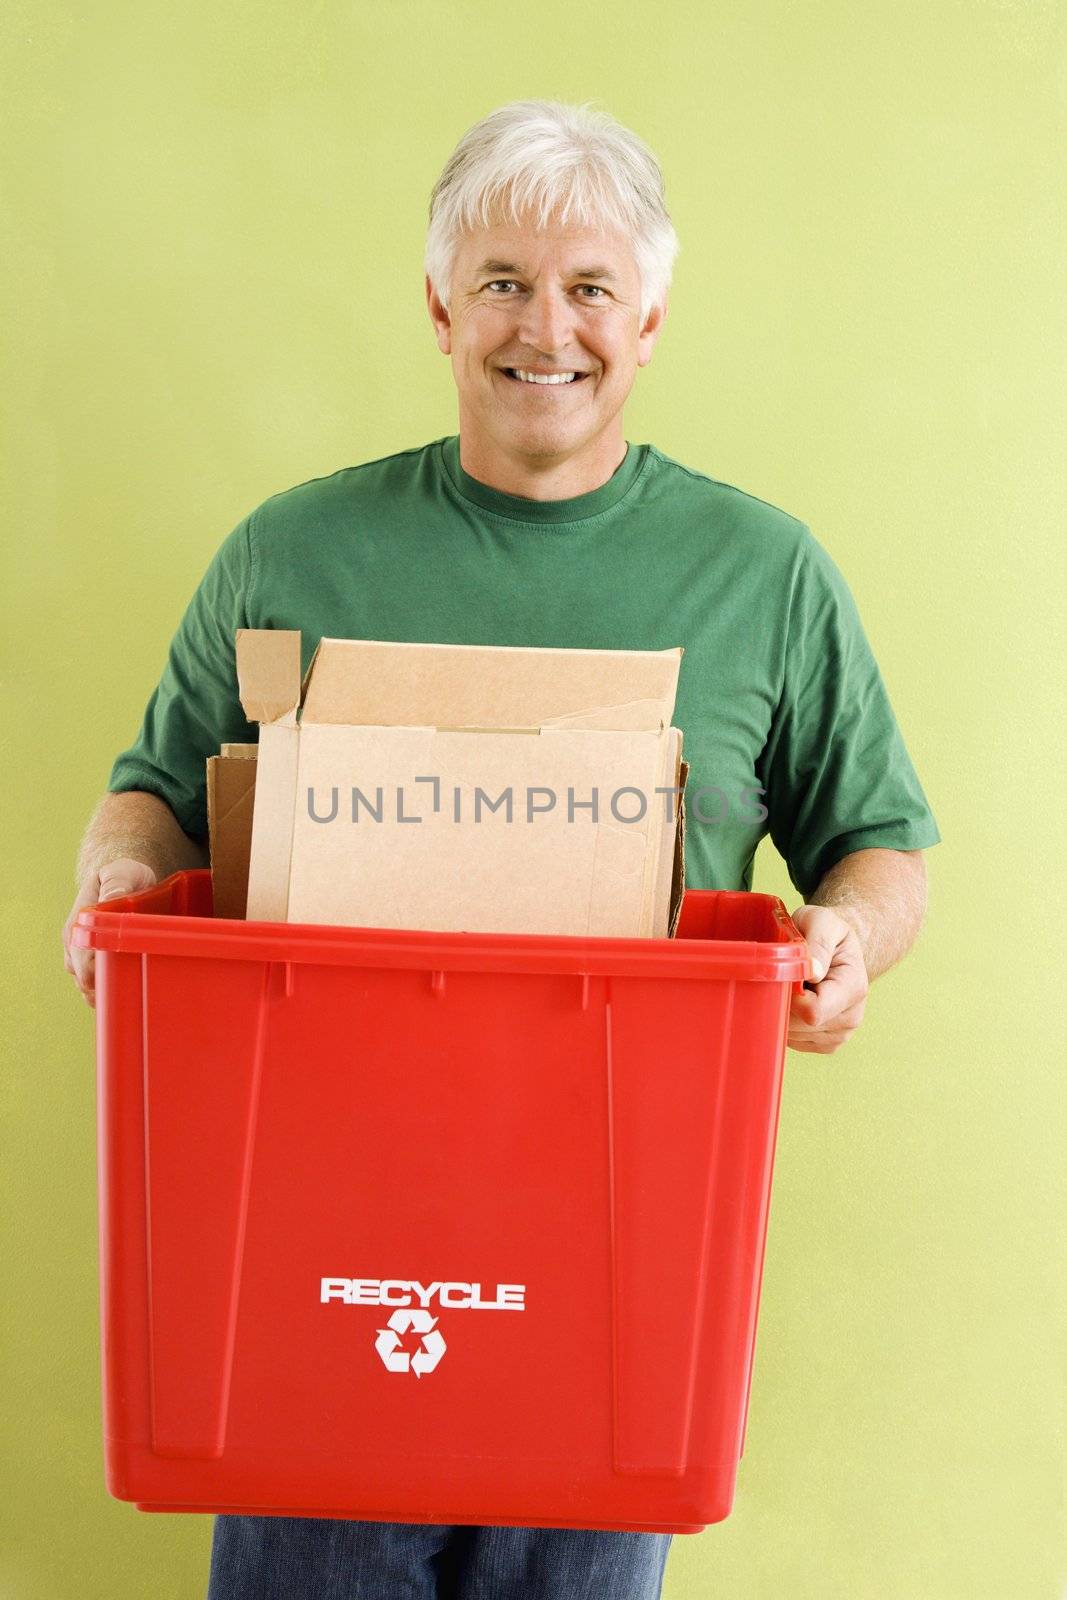 Portrait of smiling adult man holding recycling bin full of cardboard.